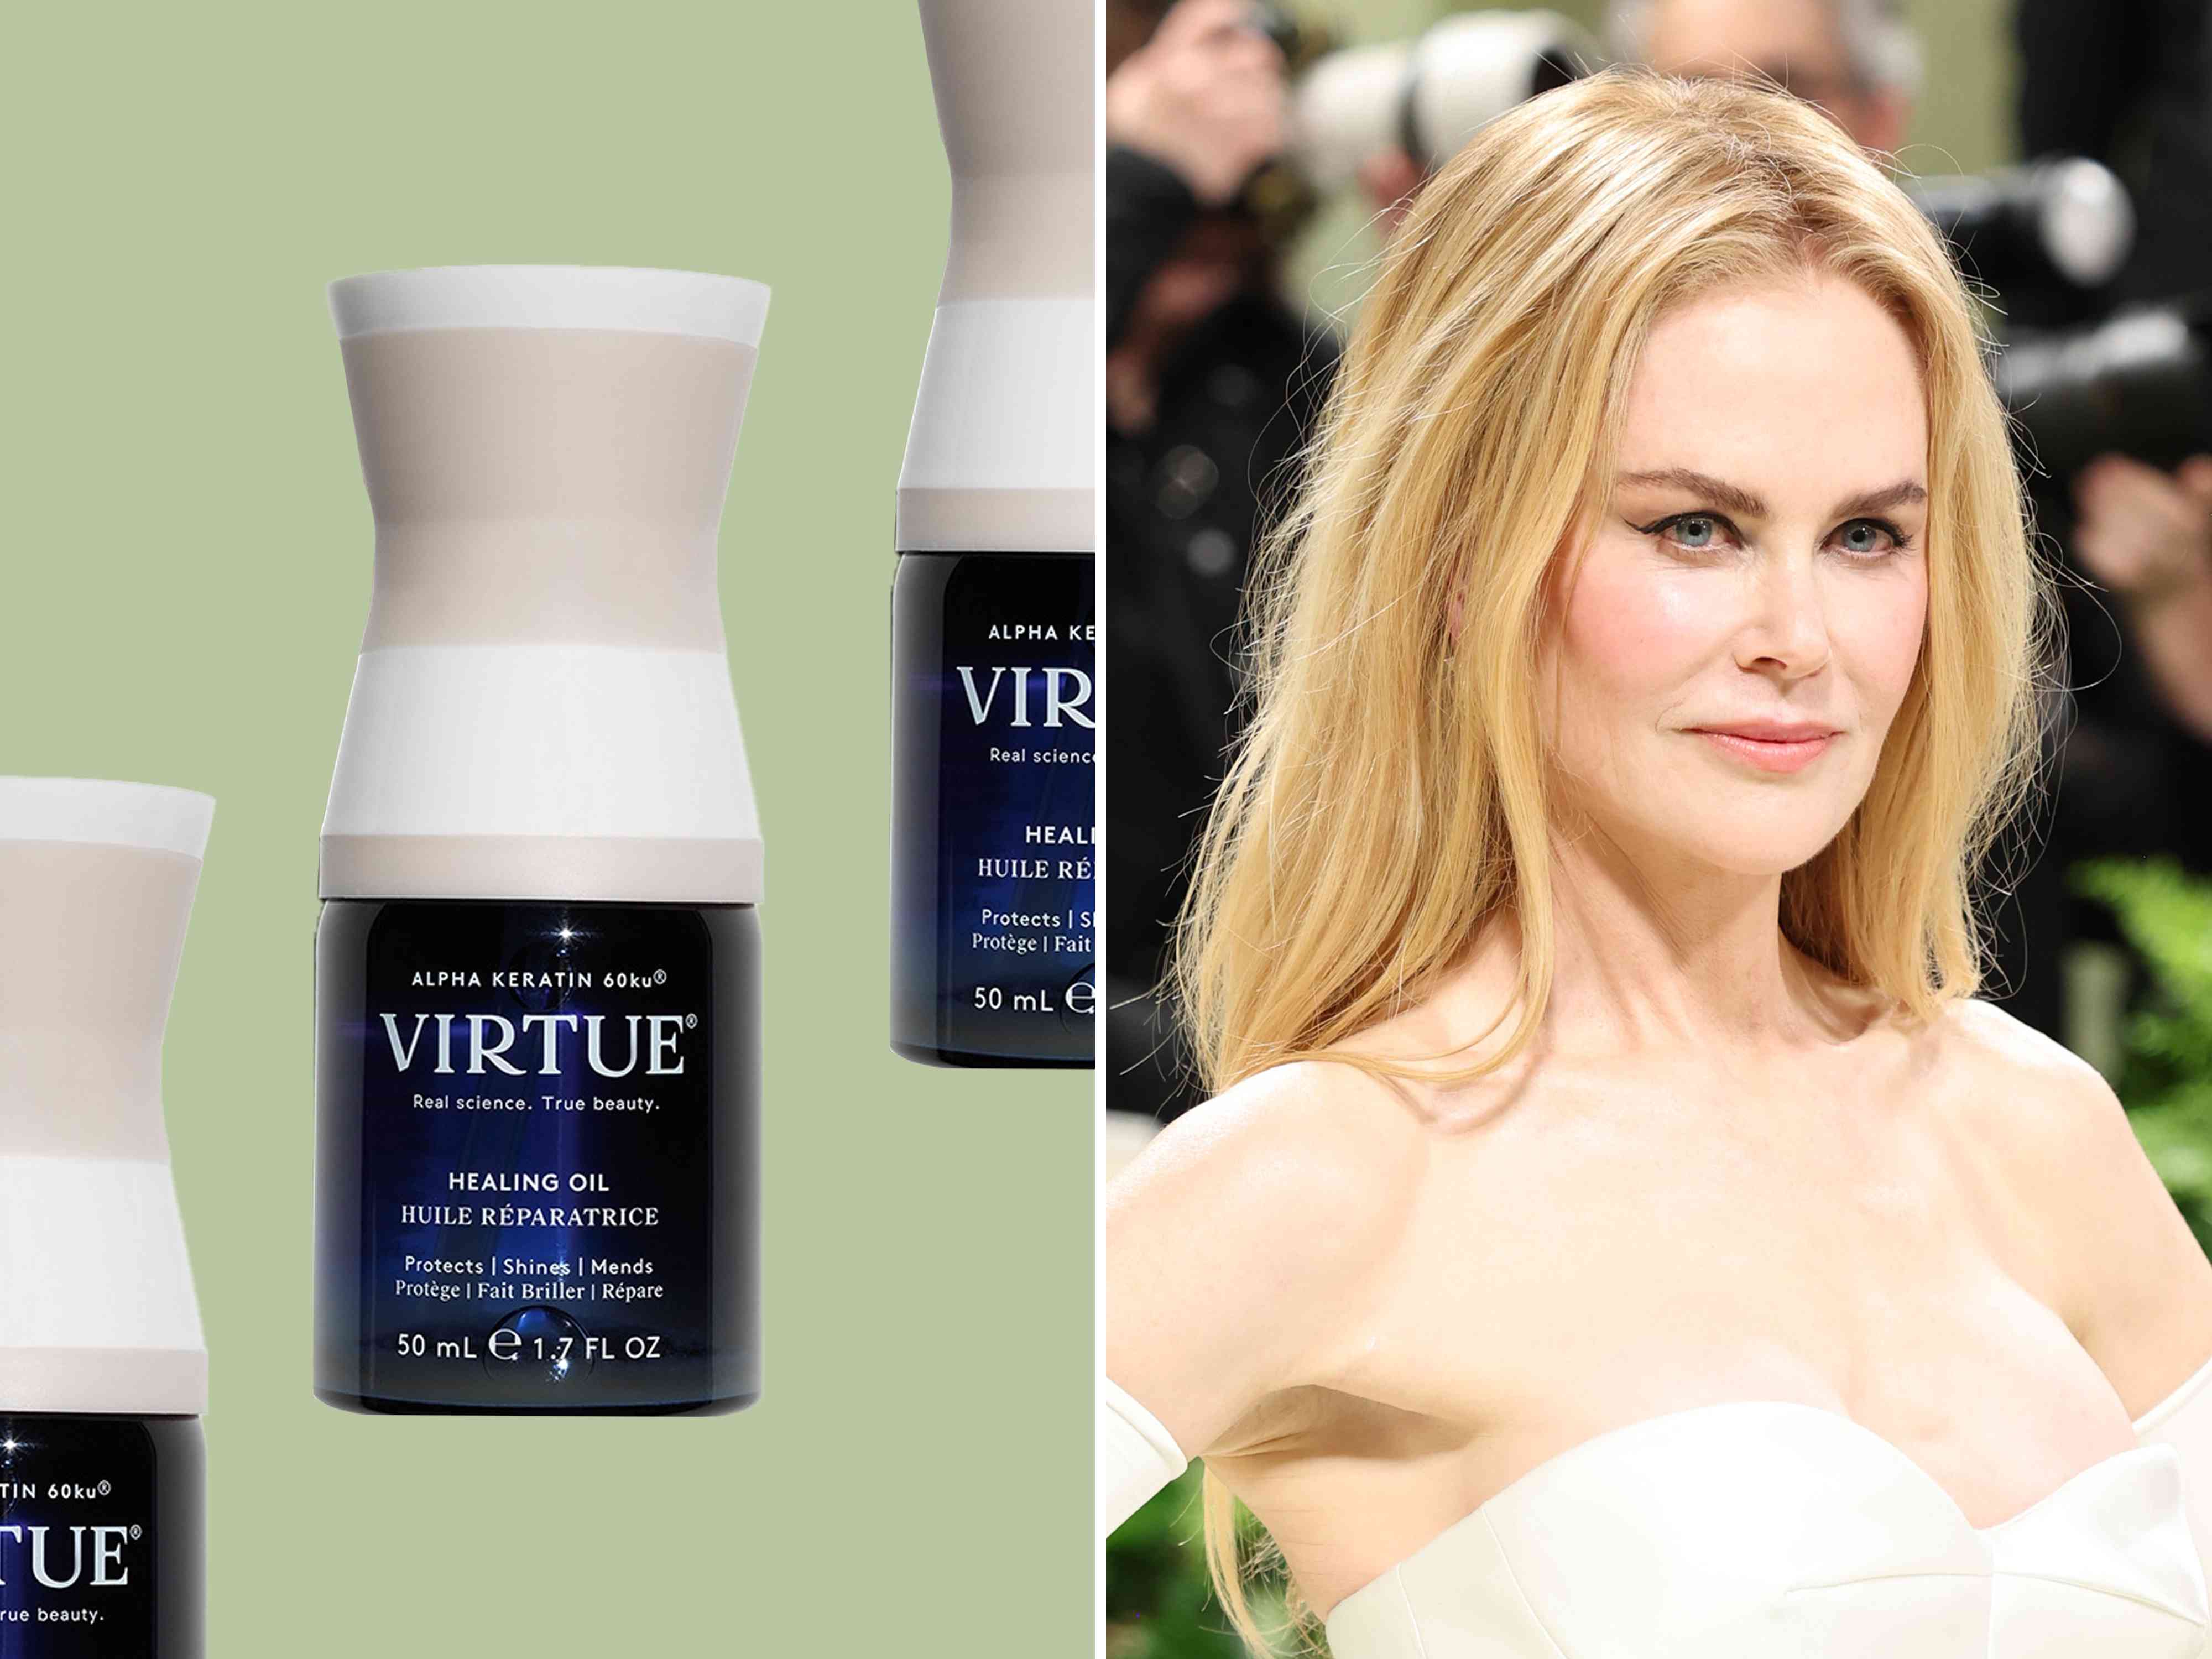 My Straggly Strands Are Now Shiny Thanks to the Oil Behind Nicole Kidman’s Glossy Hair